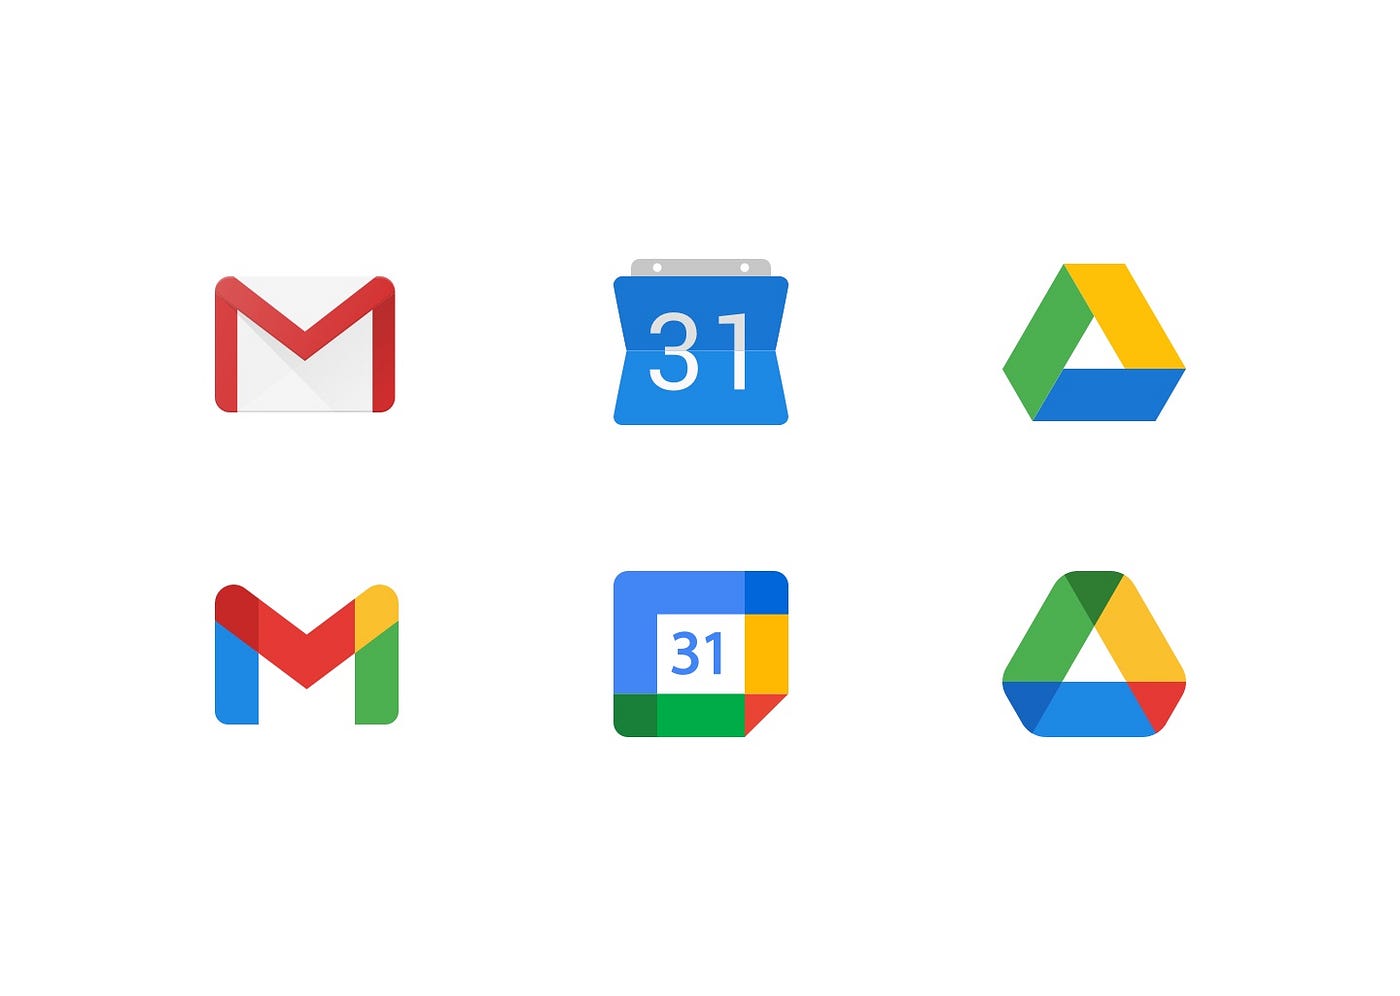 Google old and new iconography